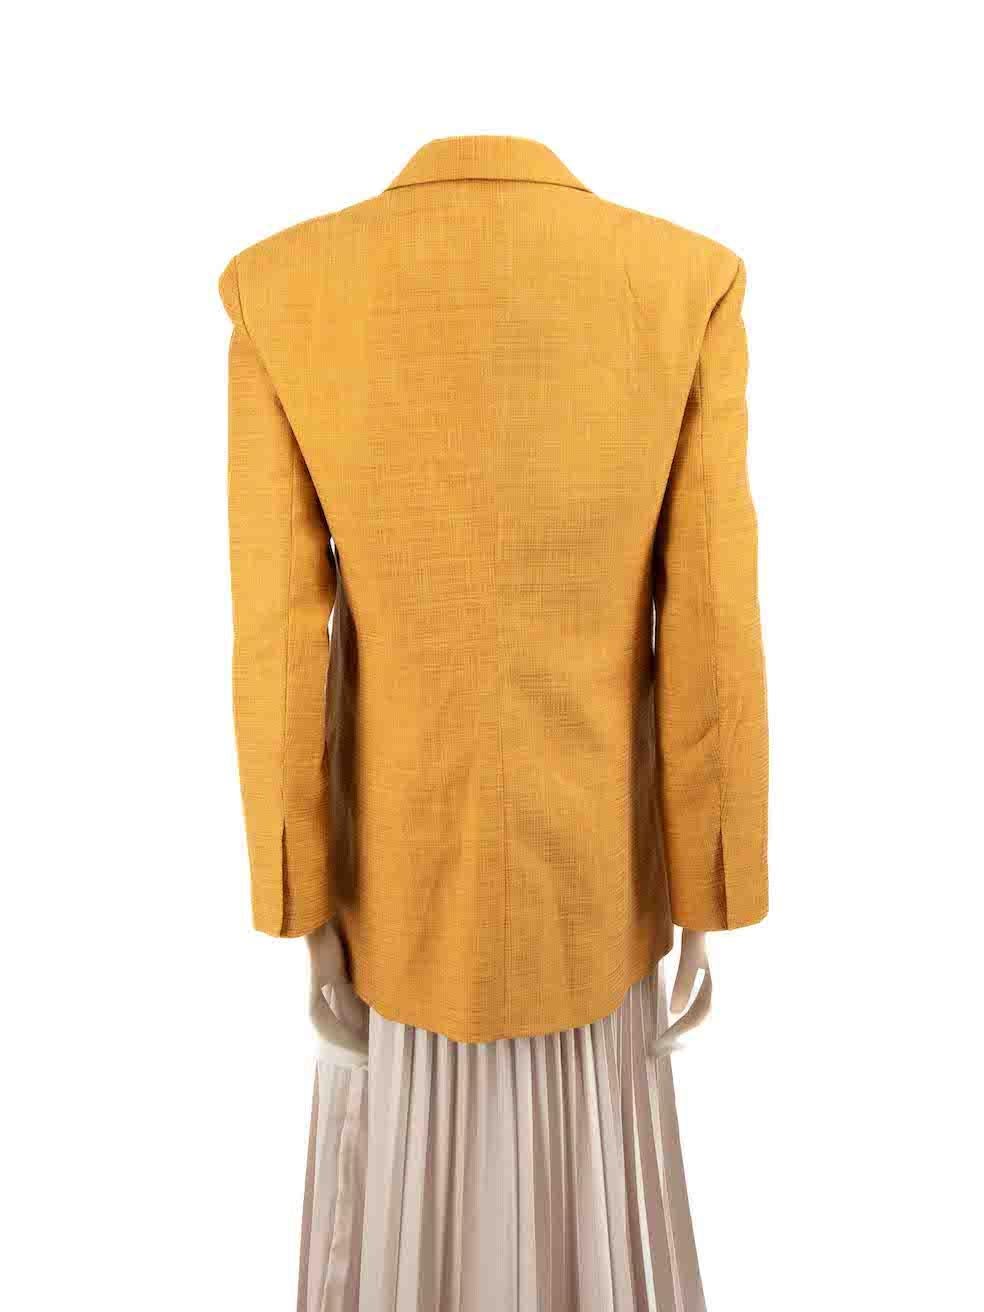 Sandro Mustard Yellow Single Breasted Blazer Size M In New Condition For Sale In London, GB